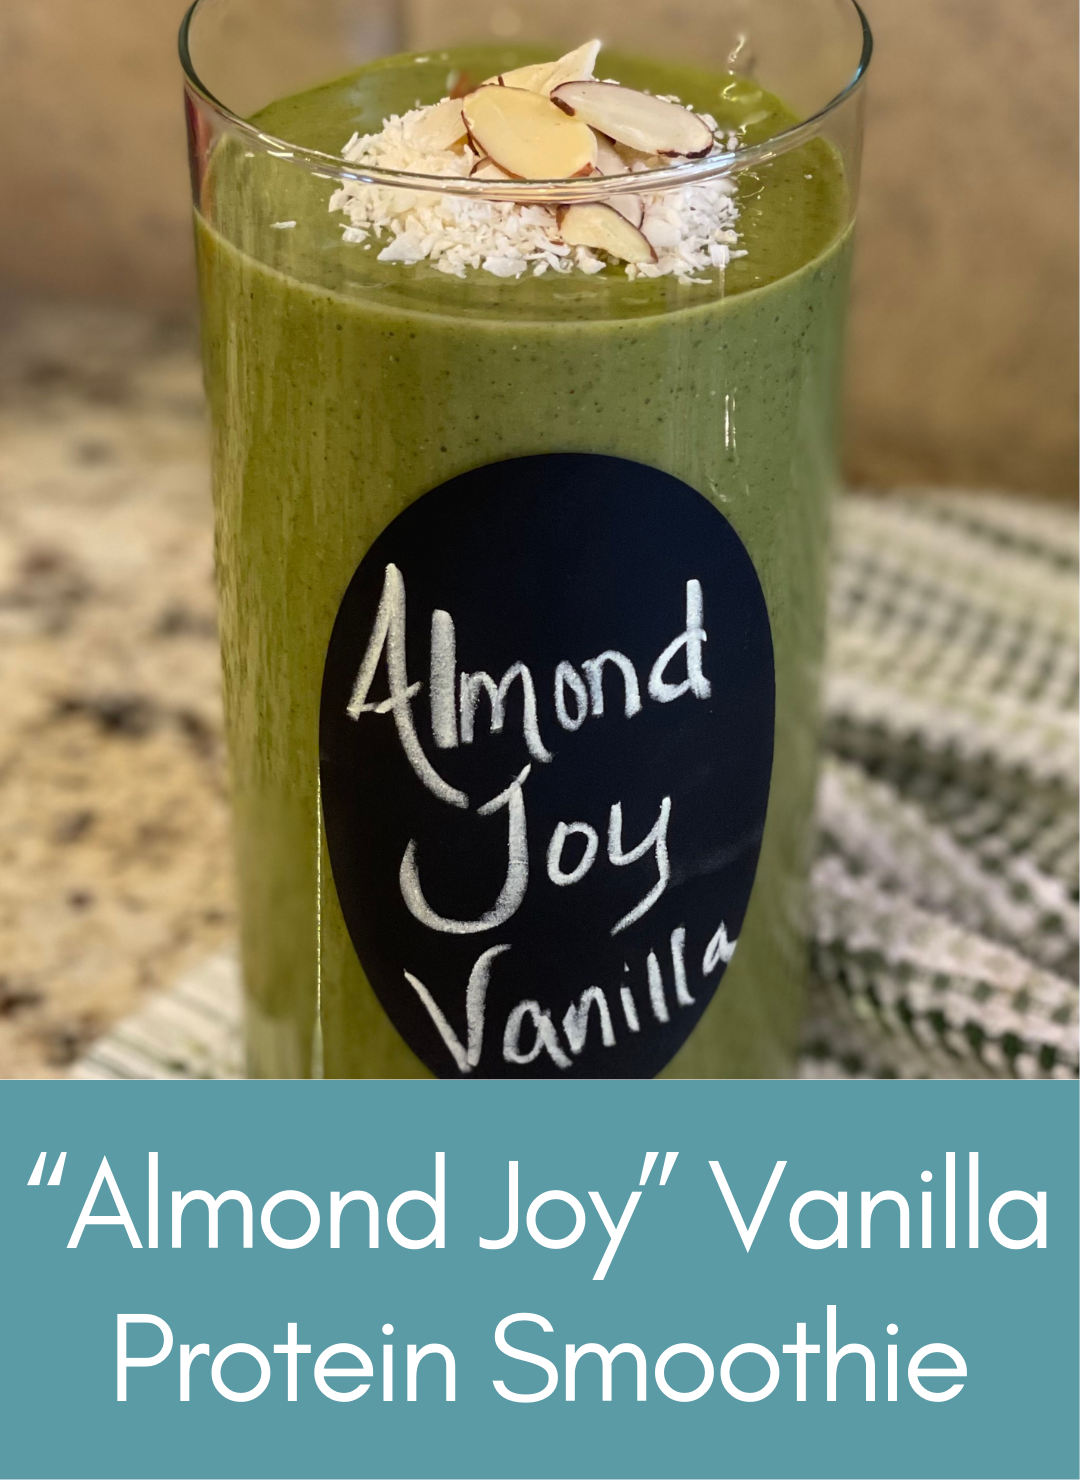 Almond joy vanilla protein superfood power smoothie Picture with link to recipe